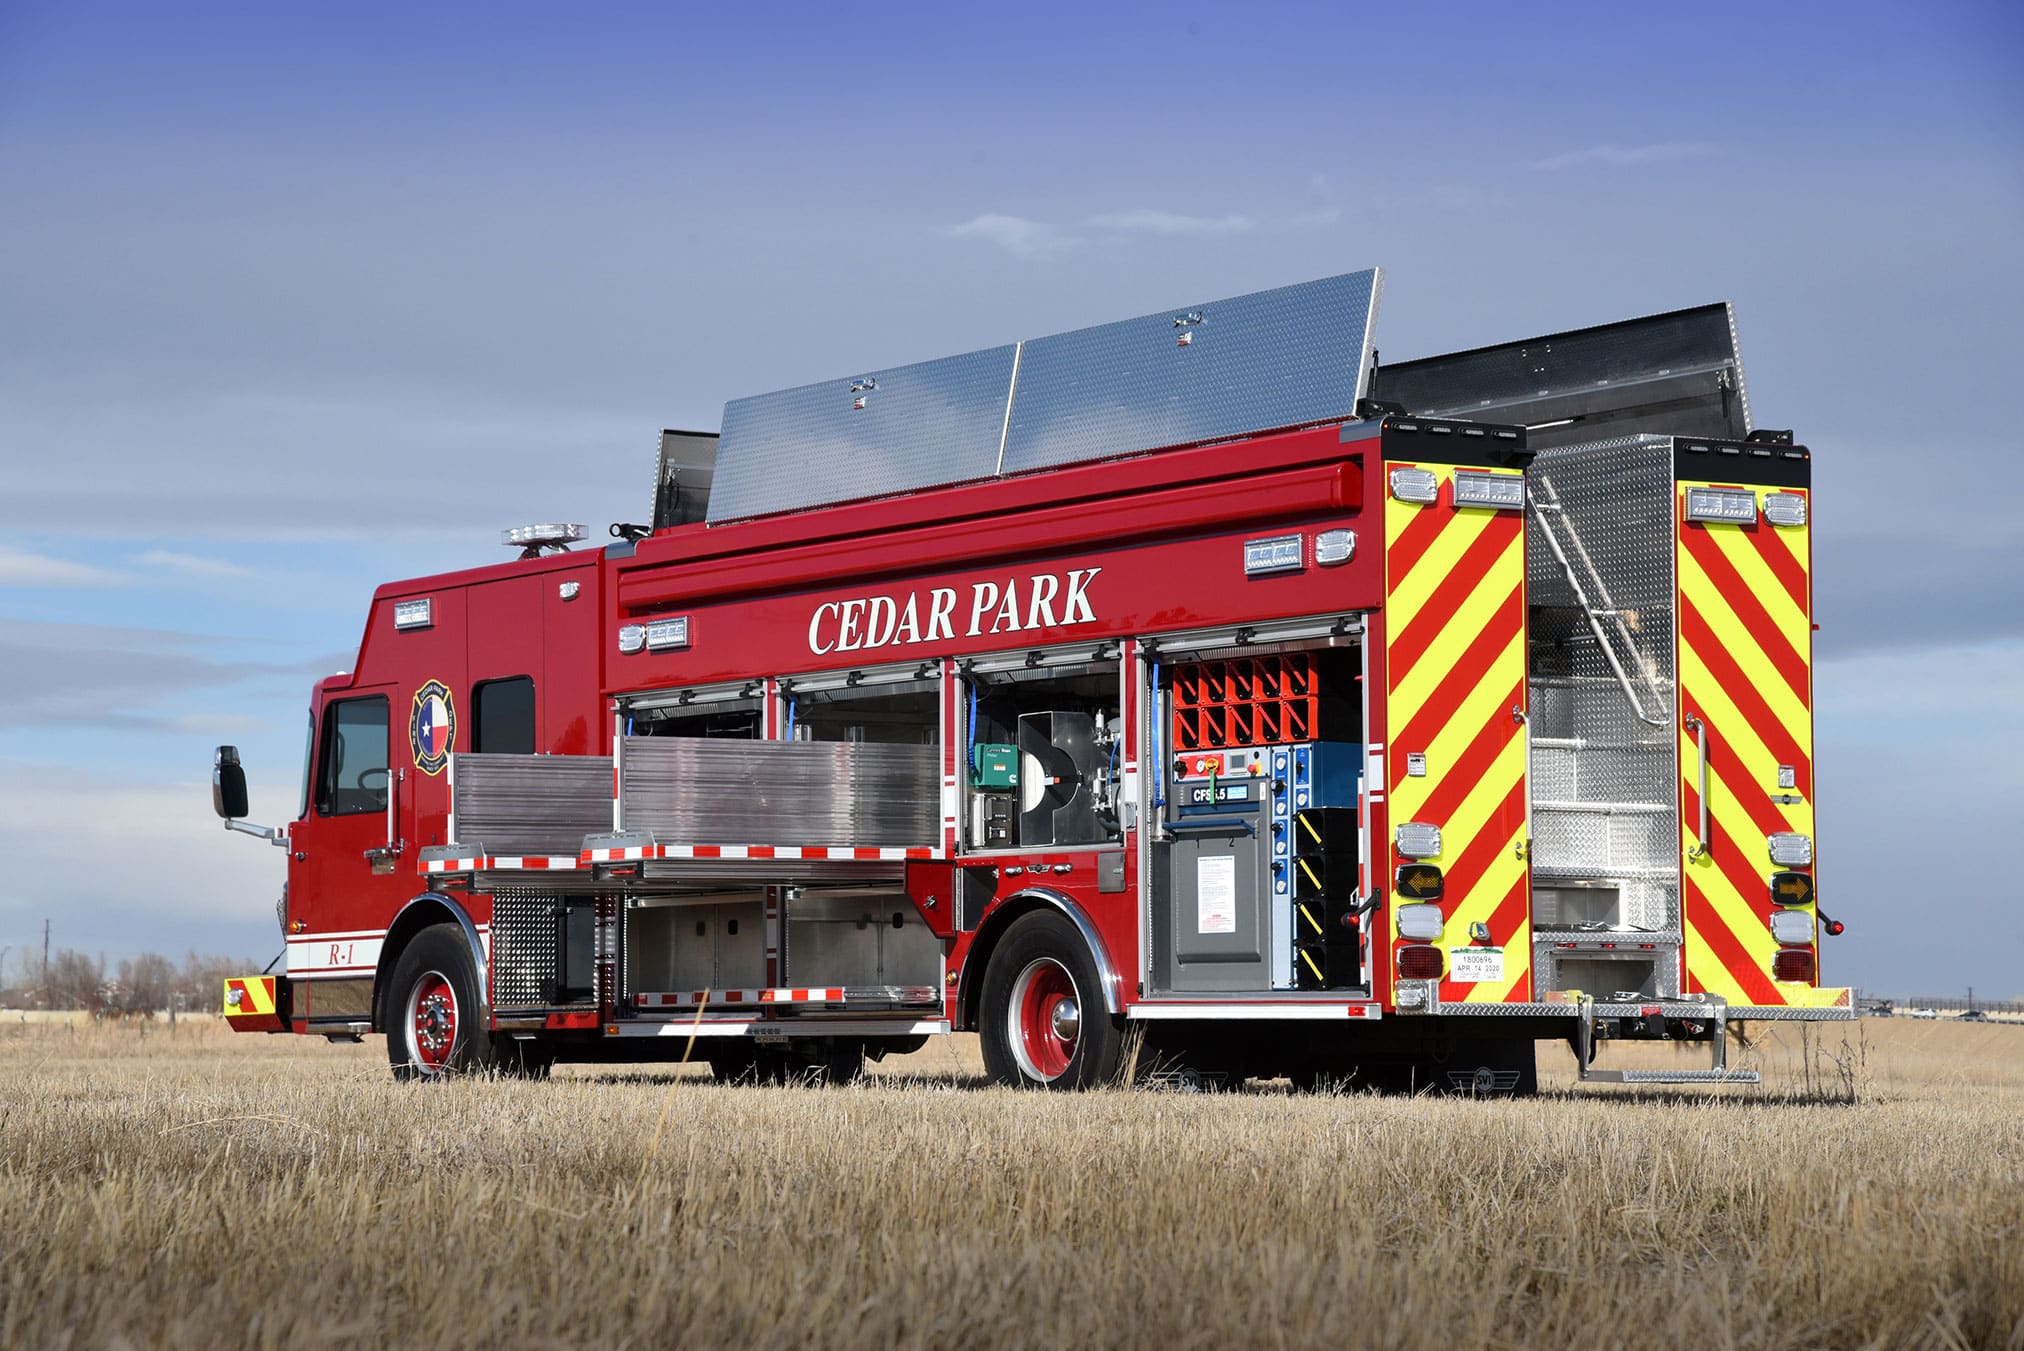 Featured image for “Cedar Park, TX Fire Department Heavy Rescue #1106”